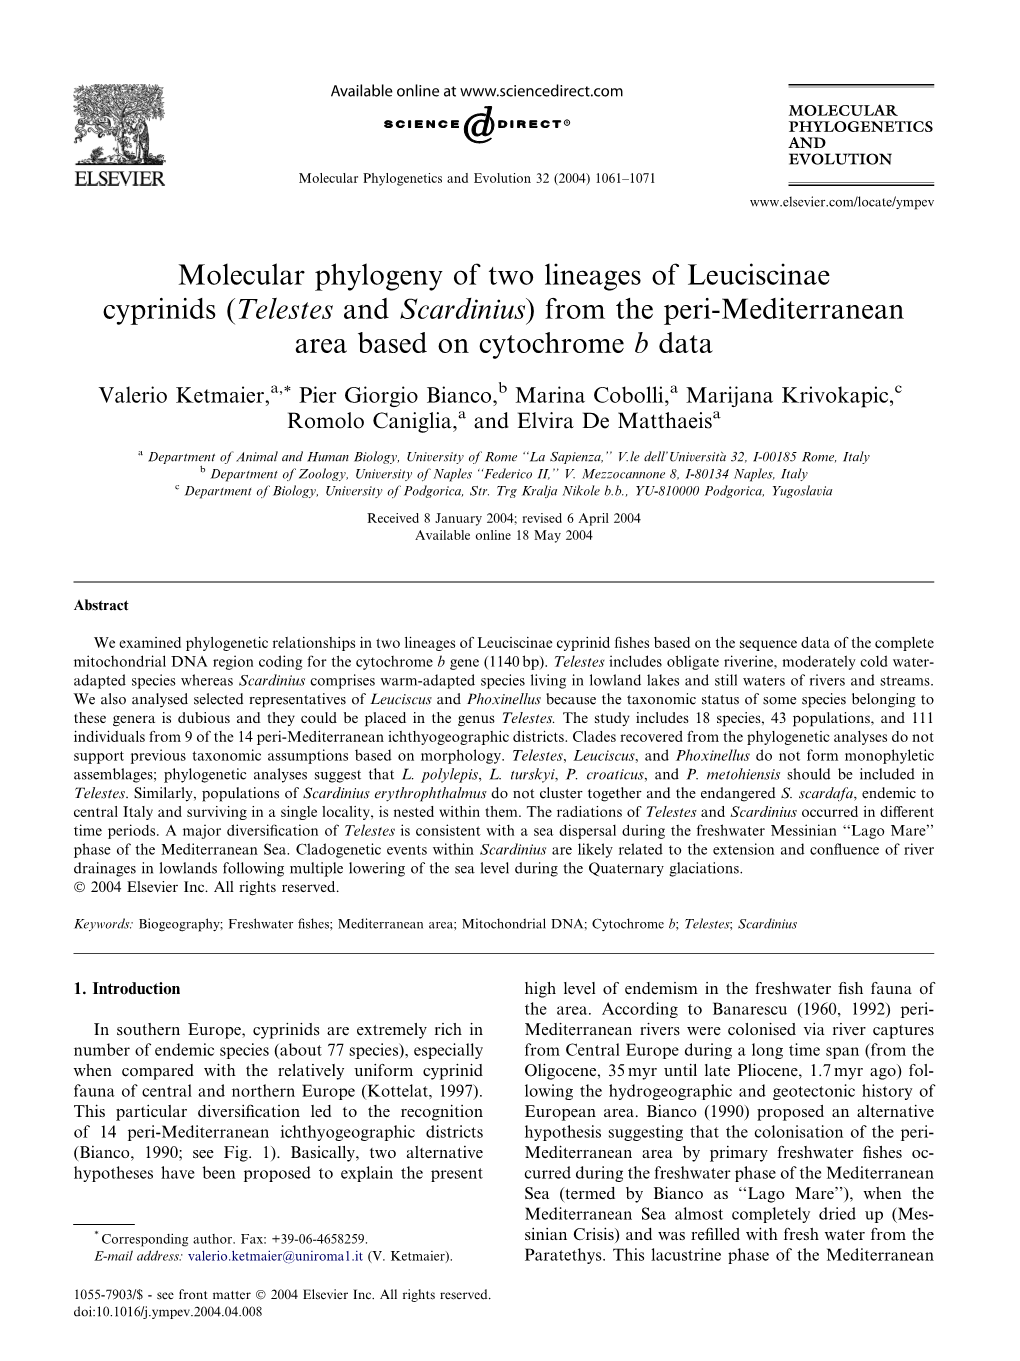 Molecular Phylogeny of Two Lineages of Leuciscinae Cyprinids (Telestes and Scardinius) from the Peri-Mediterranean Area Based on Cytochrome B Data